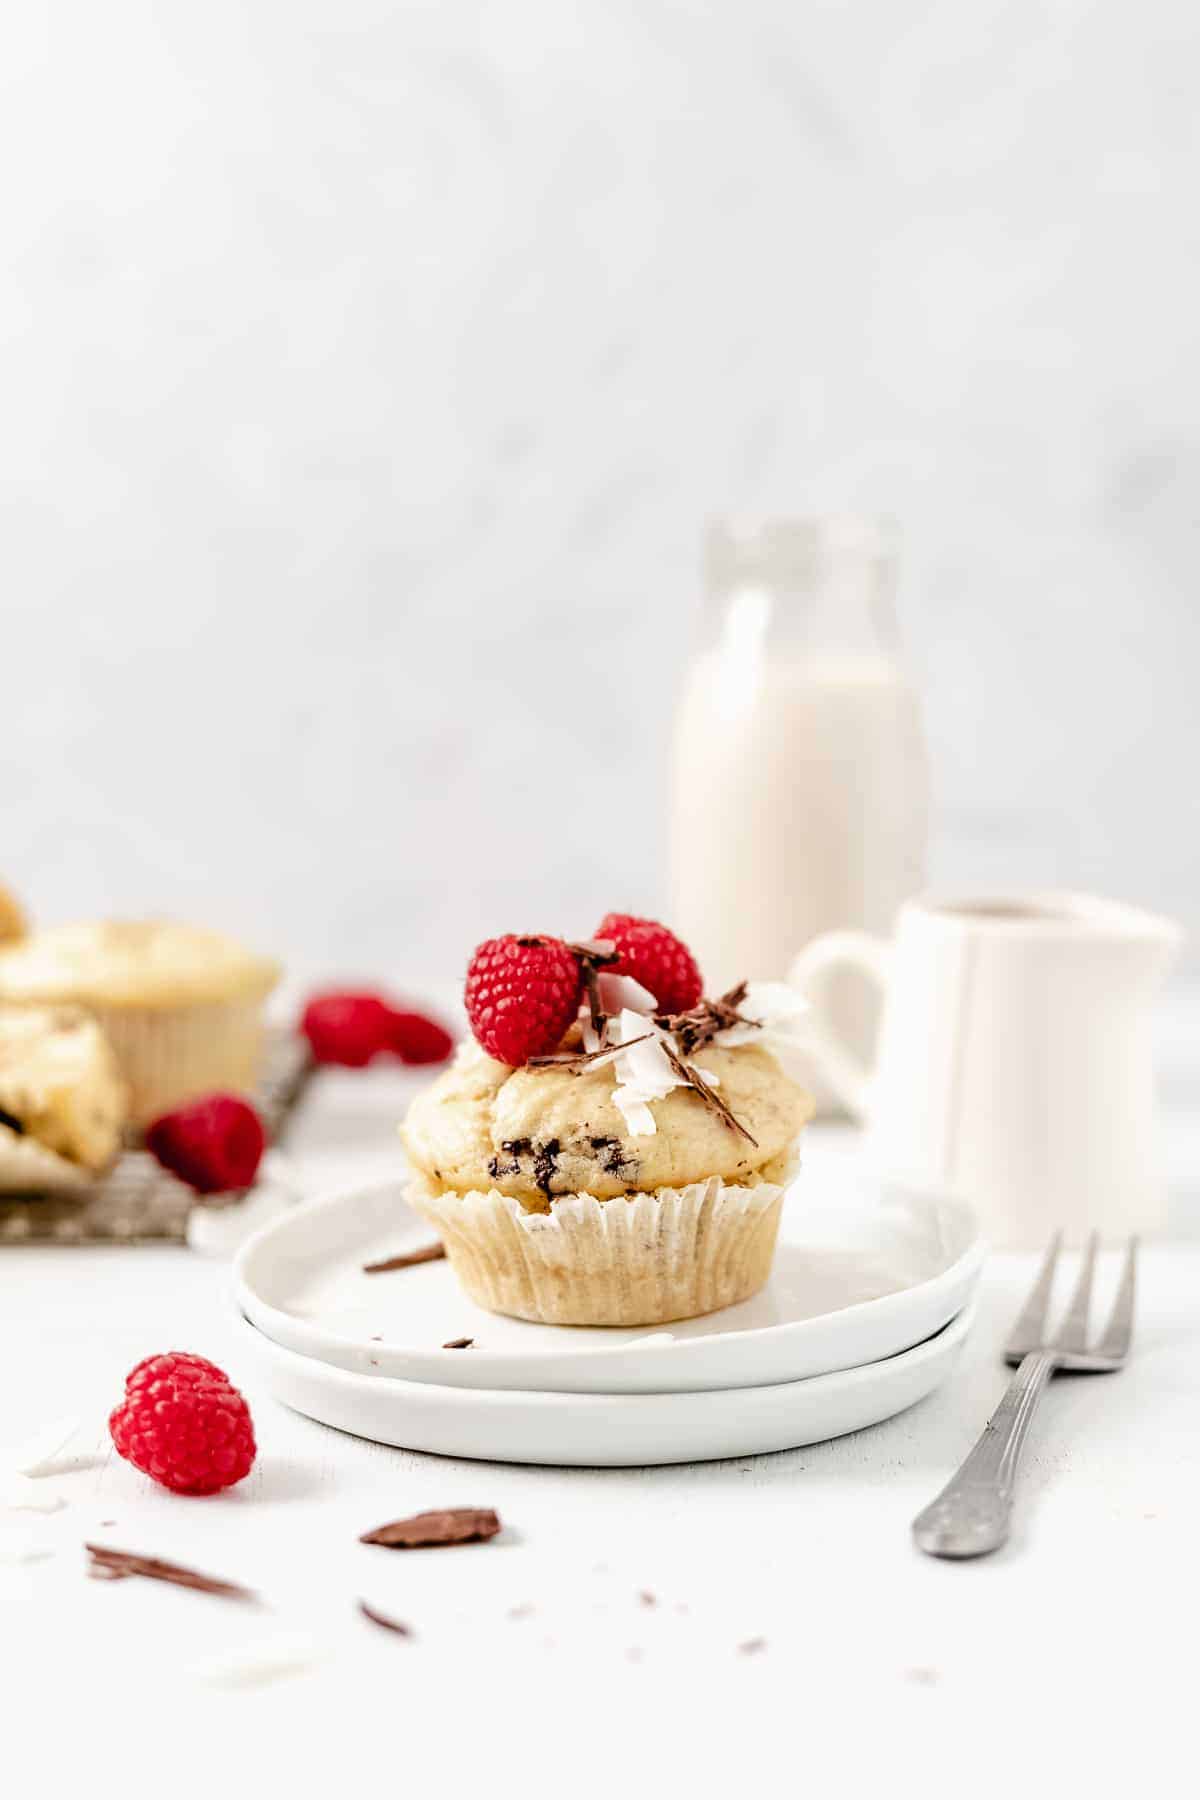 Easy Paleo Chocolate Chip Pancake Muffins are a no-fuss breakfast that can be baked ahead - perfect for meal prep! (gluten free, grain free, dairy free)